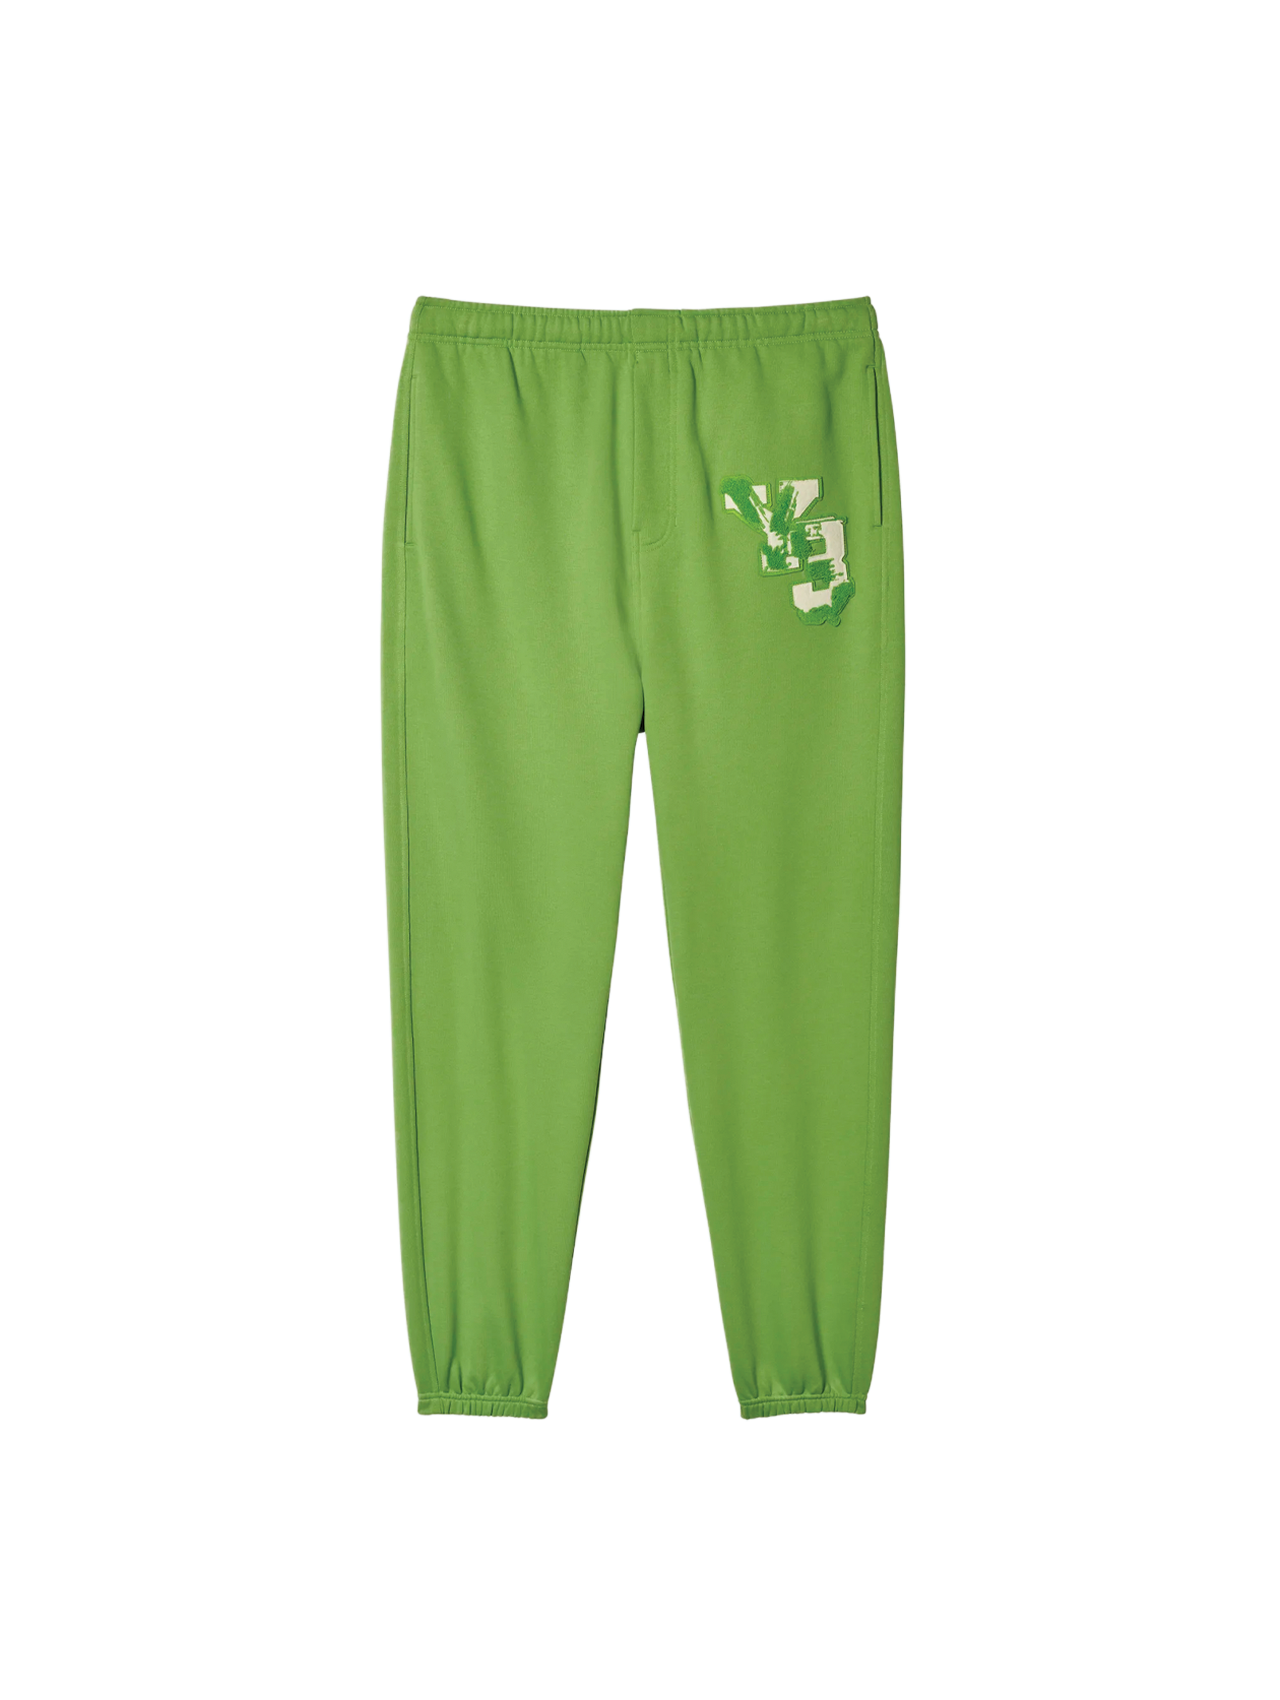 Y-3 Team Rave Green Graphic Joggers